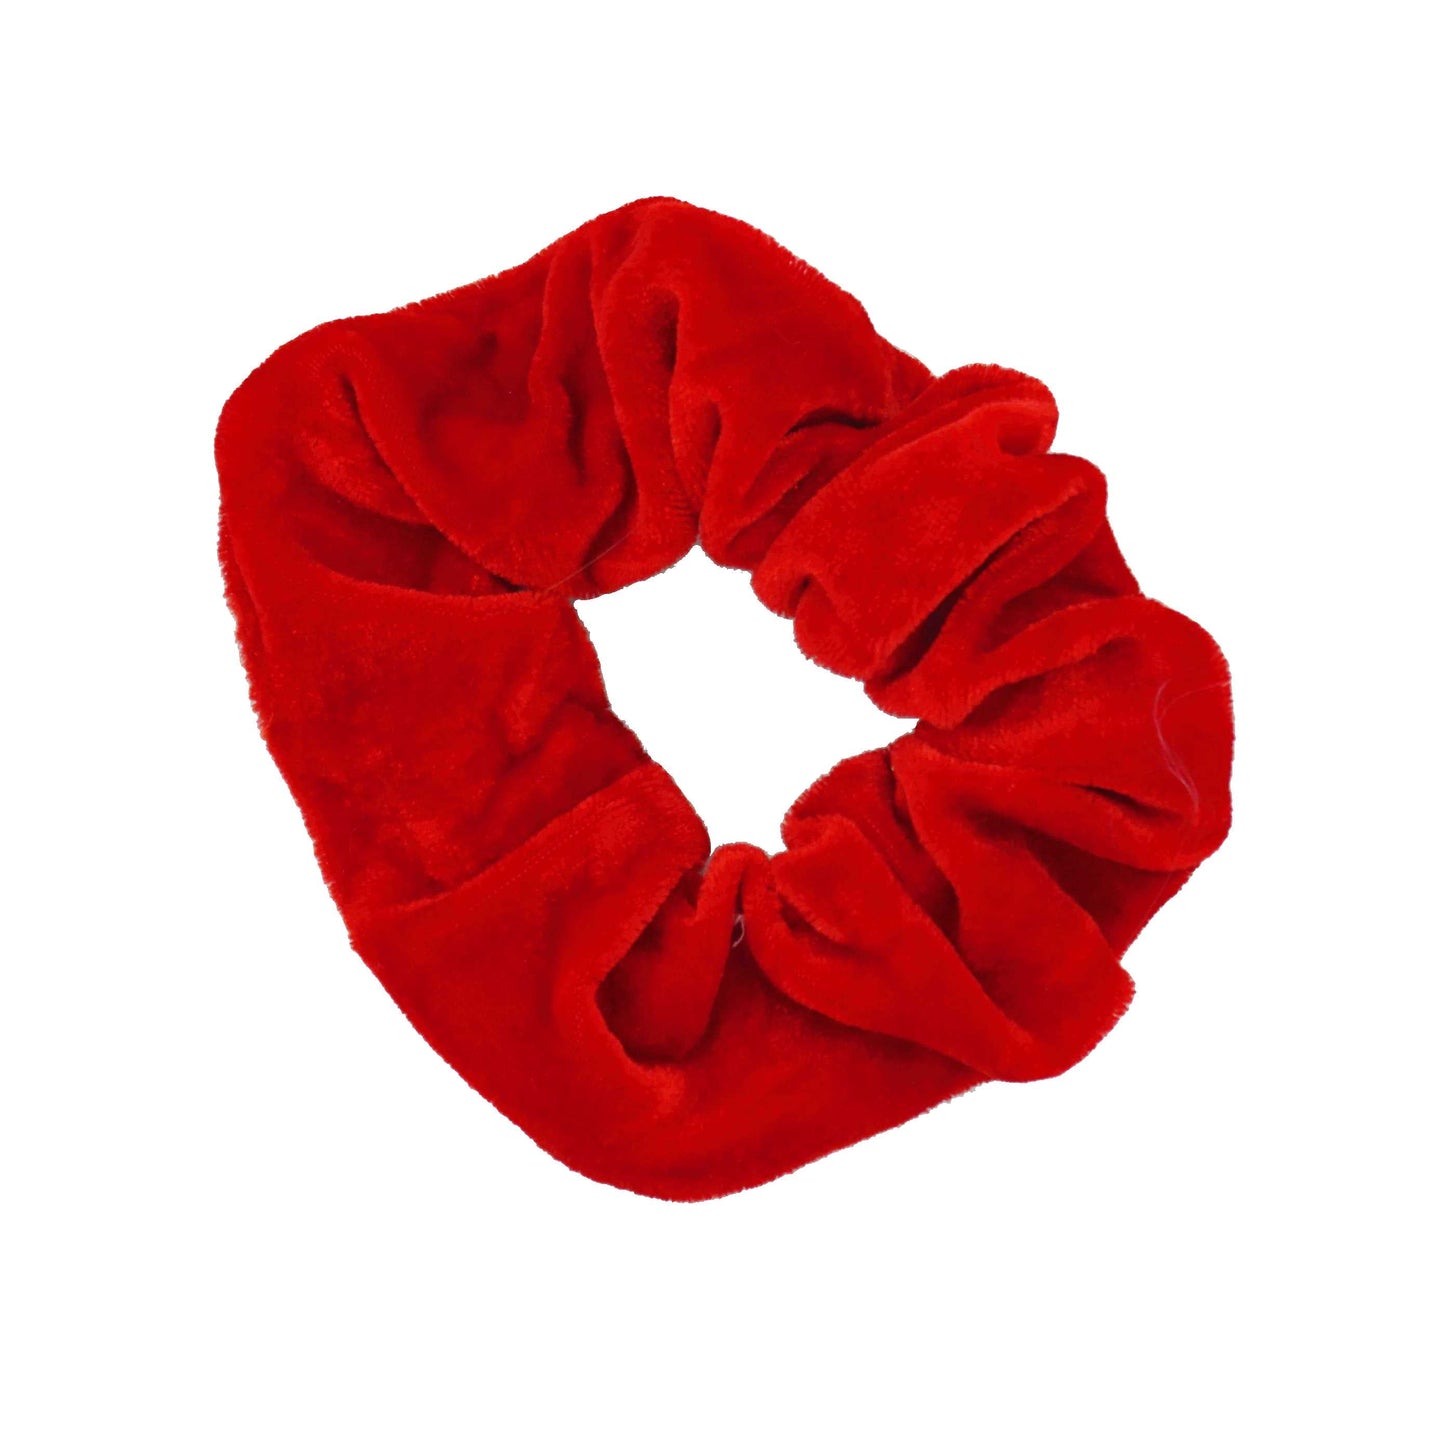 Amelia Beauty Products, Black, Red, White and Blue Velvet Velvet Scrunchies, 3.5in Diameter, Gentle on Hair, Strong Hold, No Snag, No Dents or Creases. 8 Pack - 12 Retail Packs